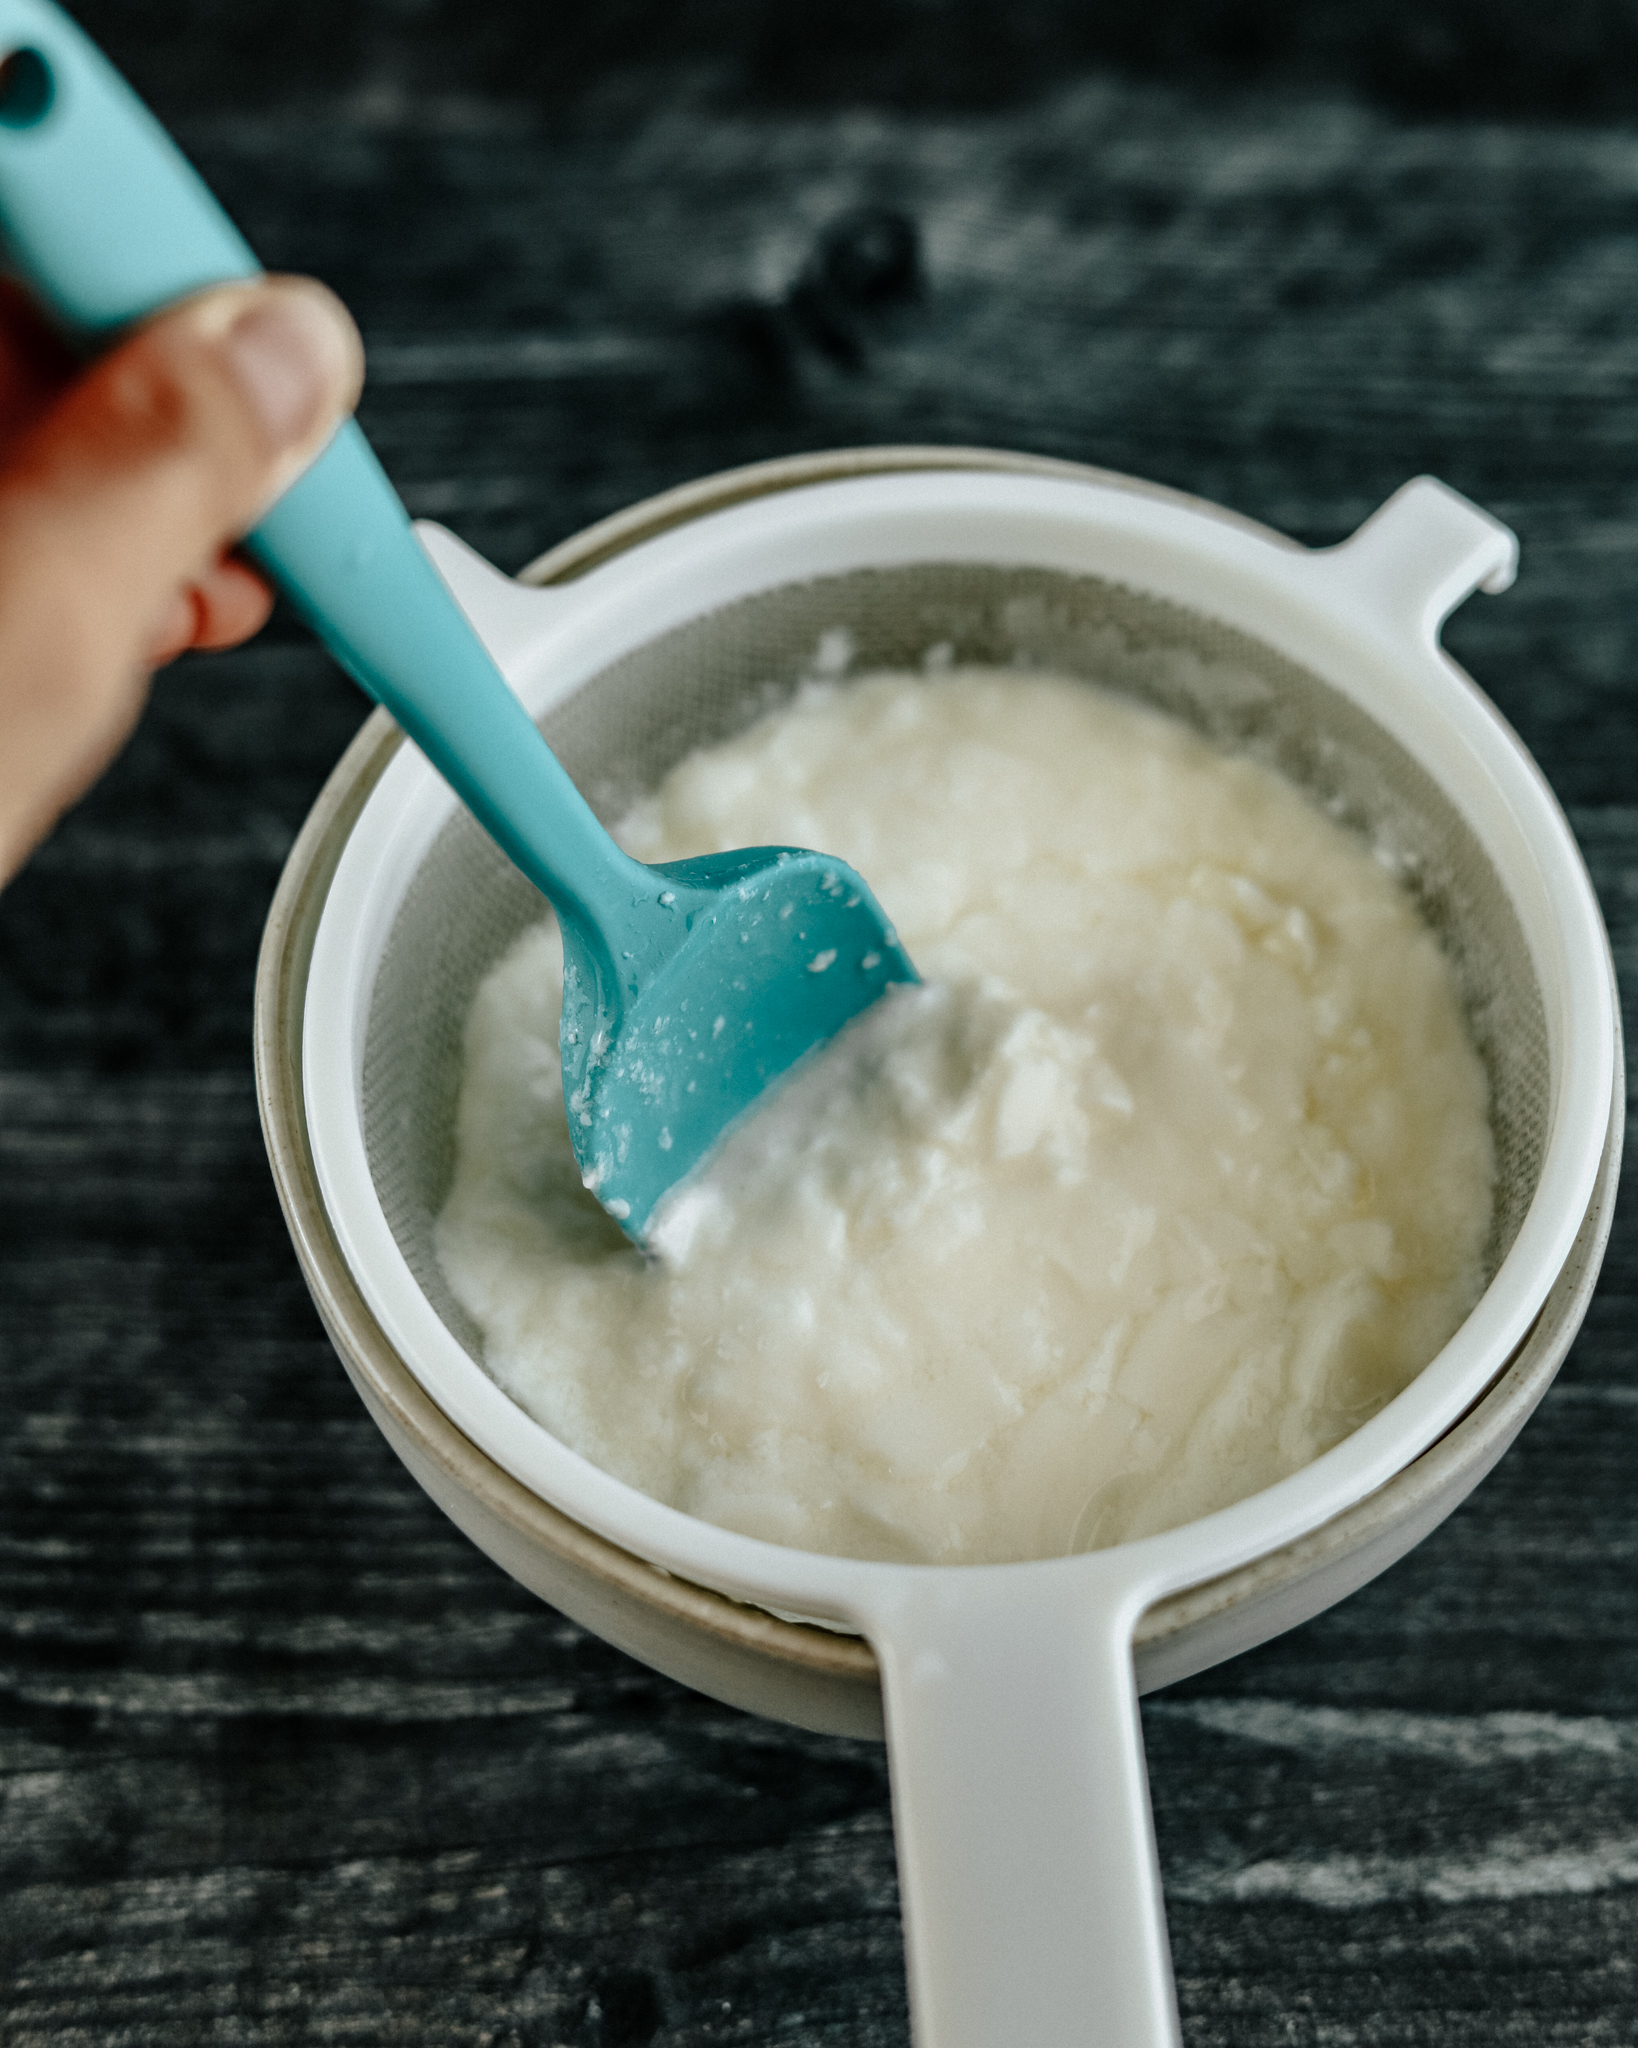 Silicone spatula separates kefir from grains in a white mesh strainer